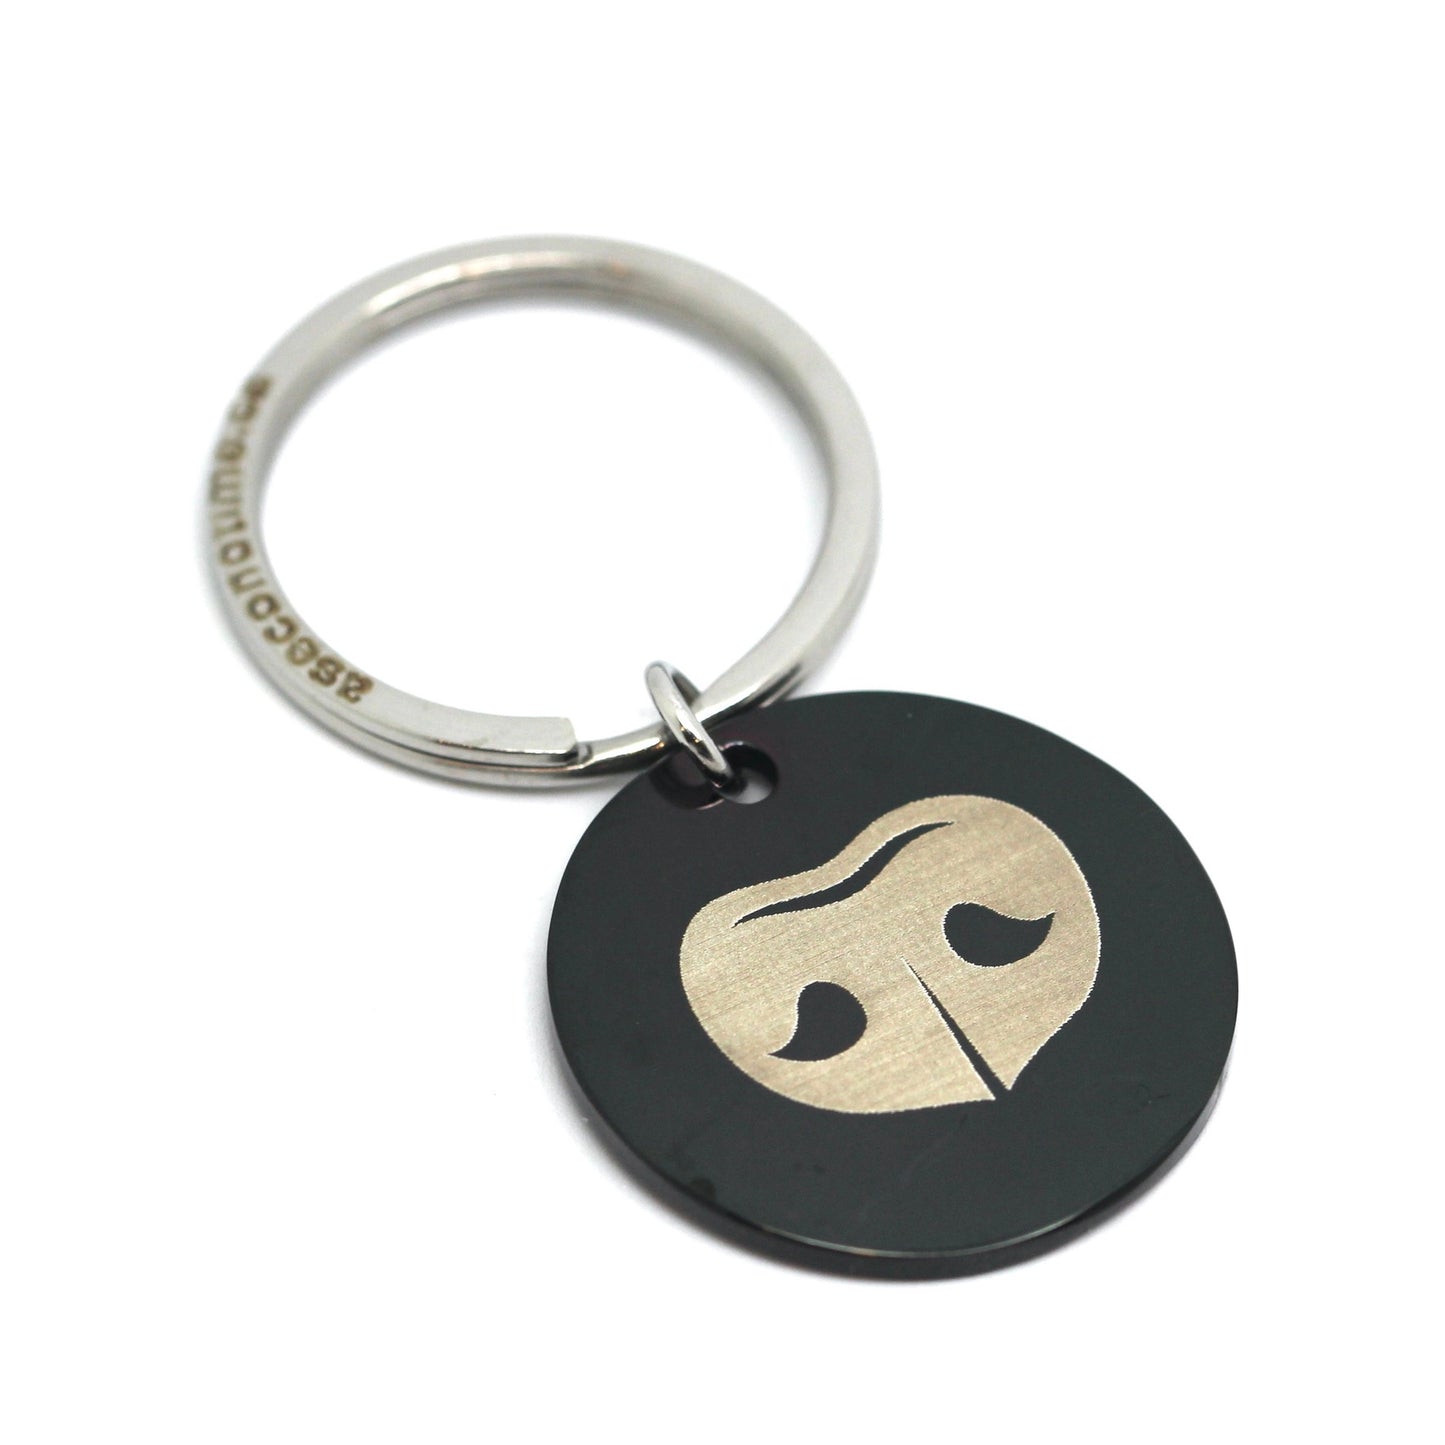 Custom Engraved Round Keychain - Engraved with actual Paw, Nose, Handwriting, Handprint or Fingerprint